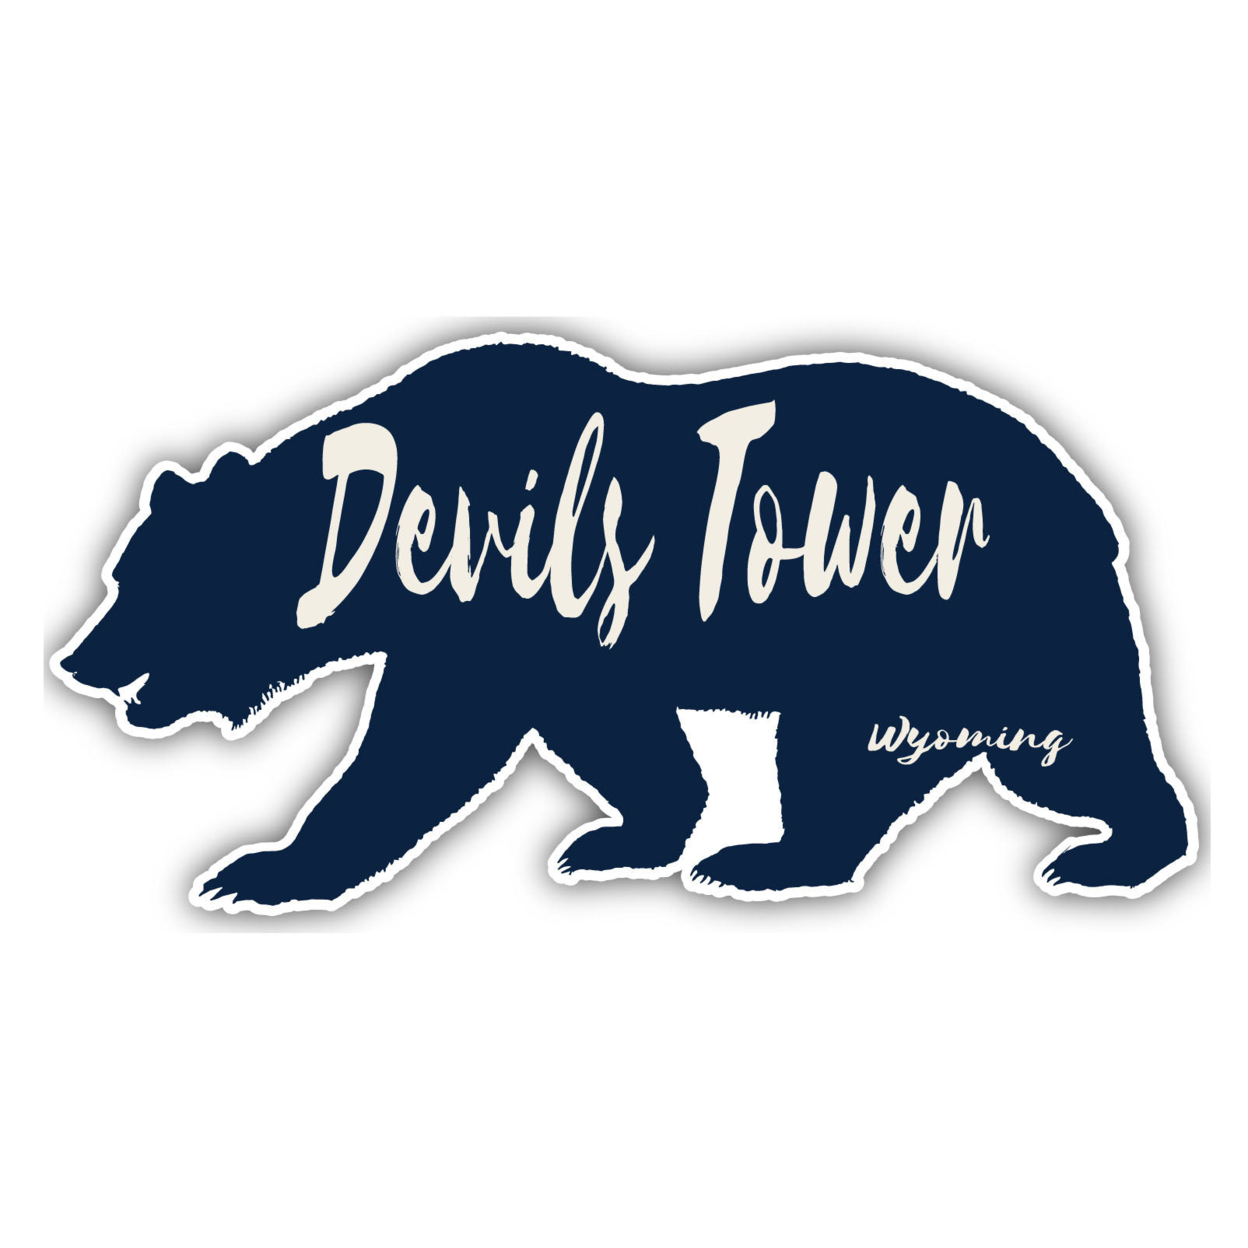 Devils Tower Wyoming Souvenir Decorative Stickers (Choose Theme And Size) - Single Unit, 4-Inch, Bear